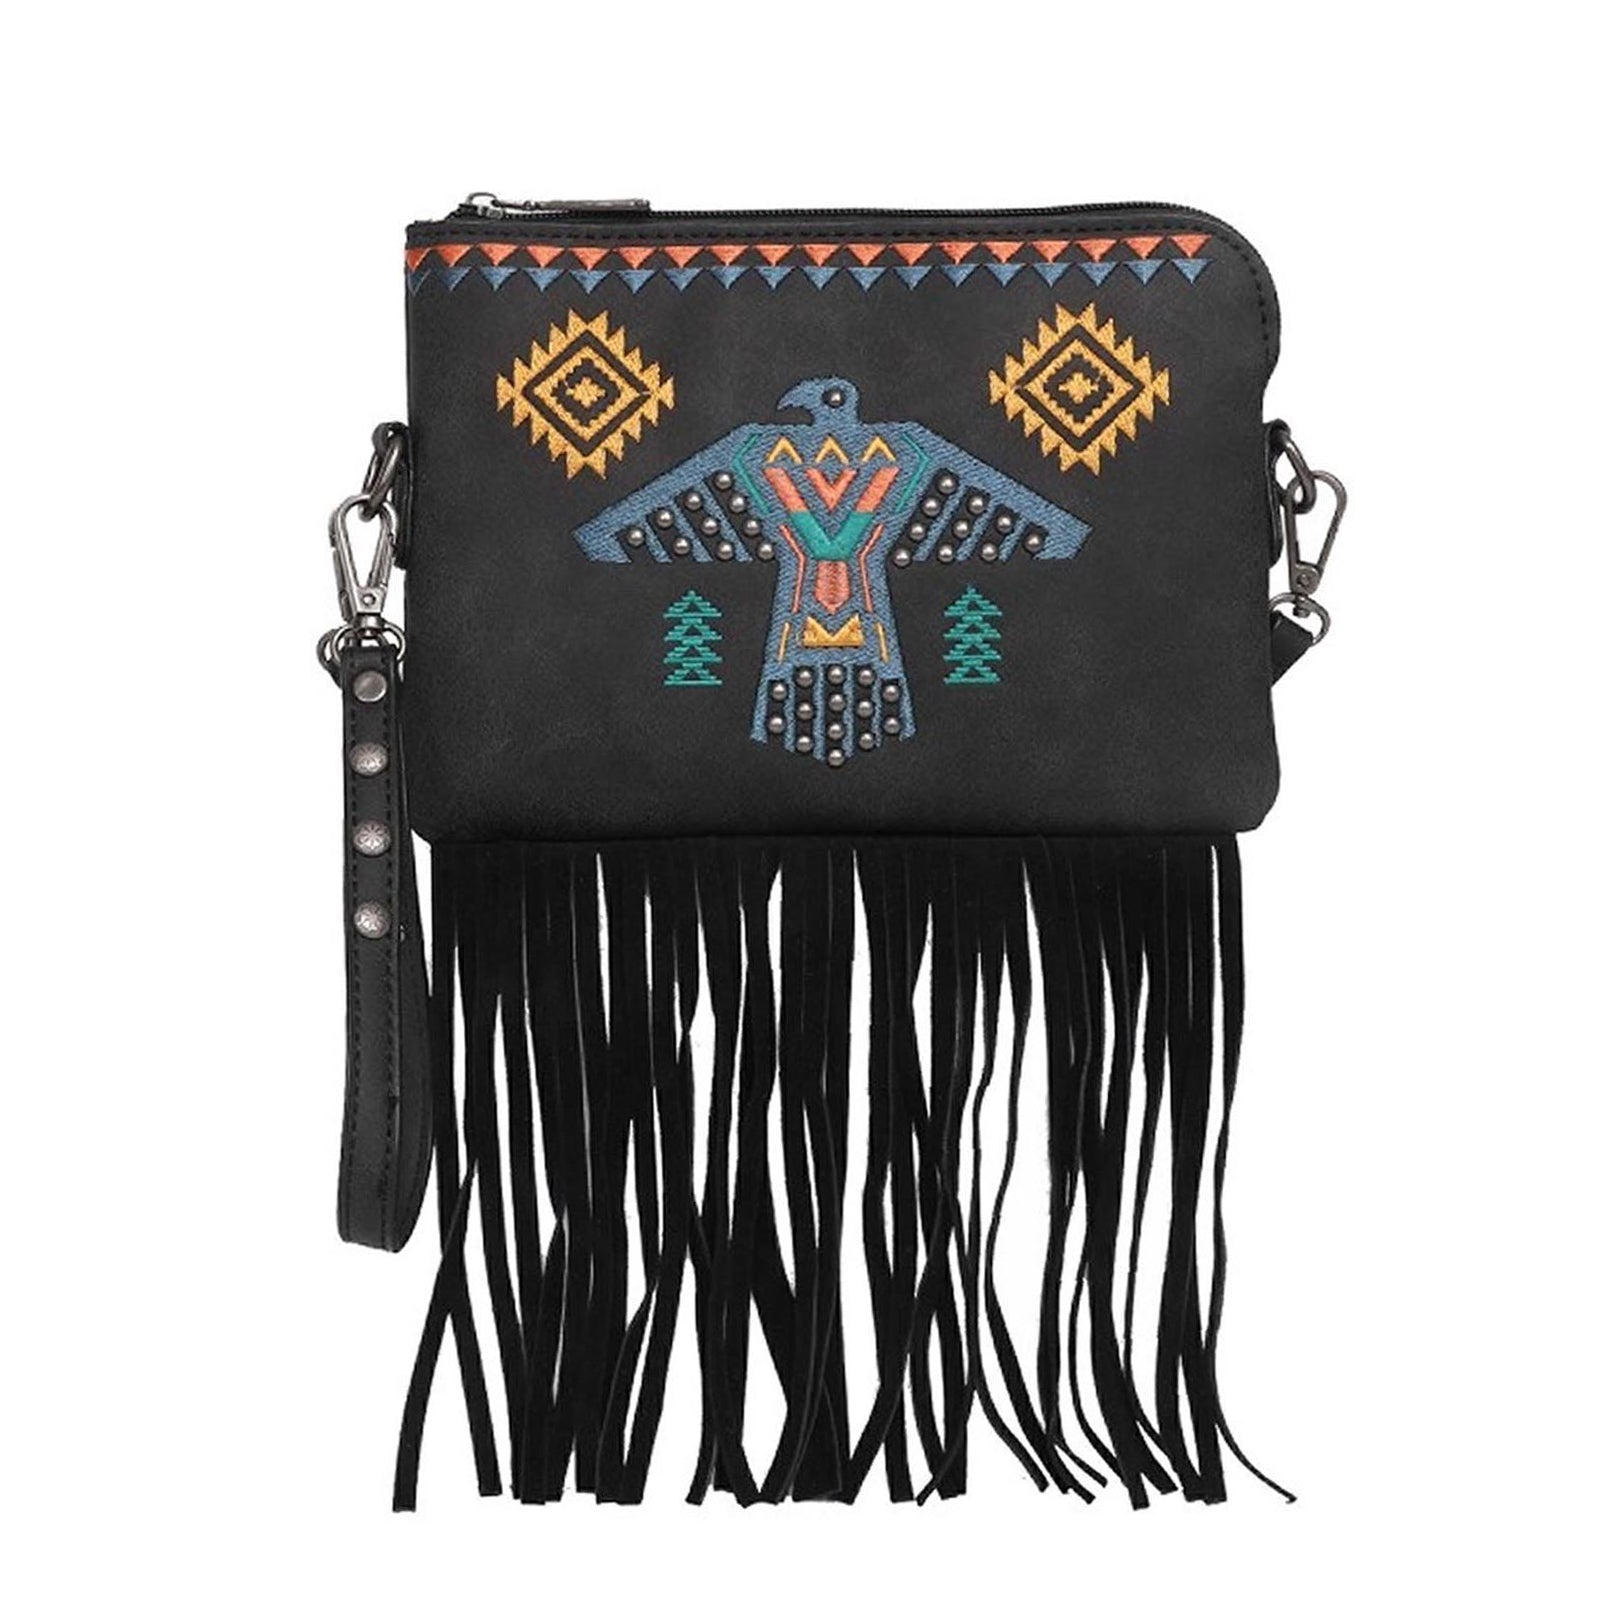 Wrangler Embroidered Fringe Collection Clutch/Wristlet/Crossbody - Cowgirl Wear